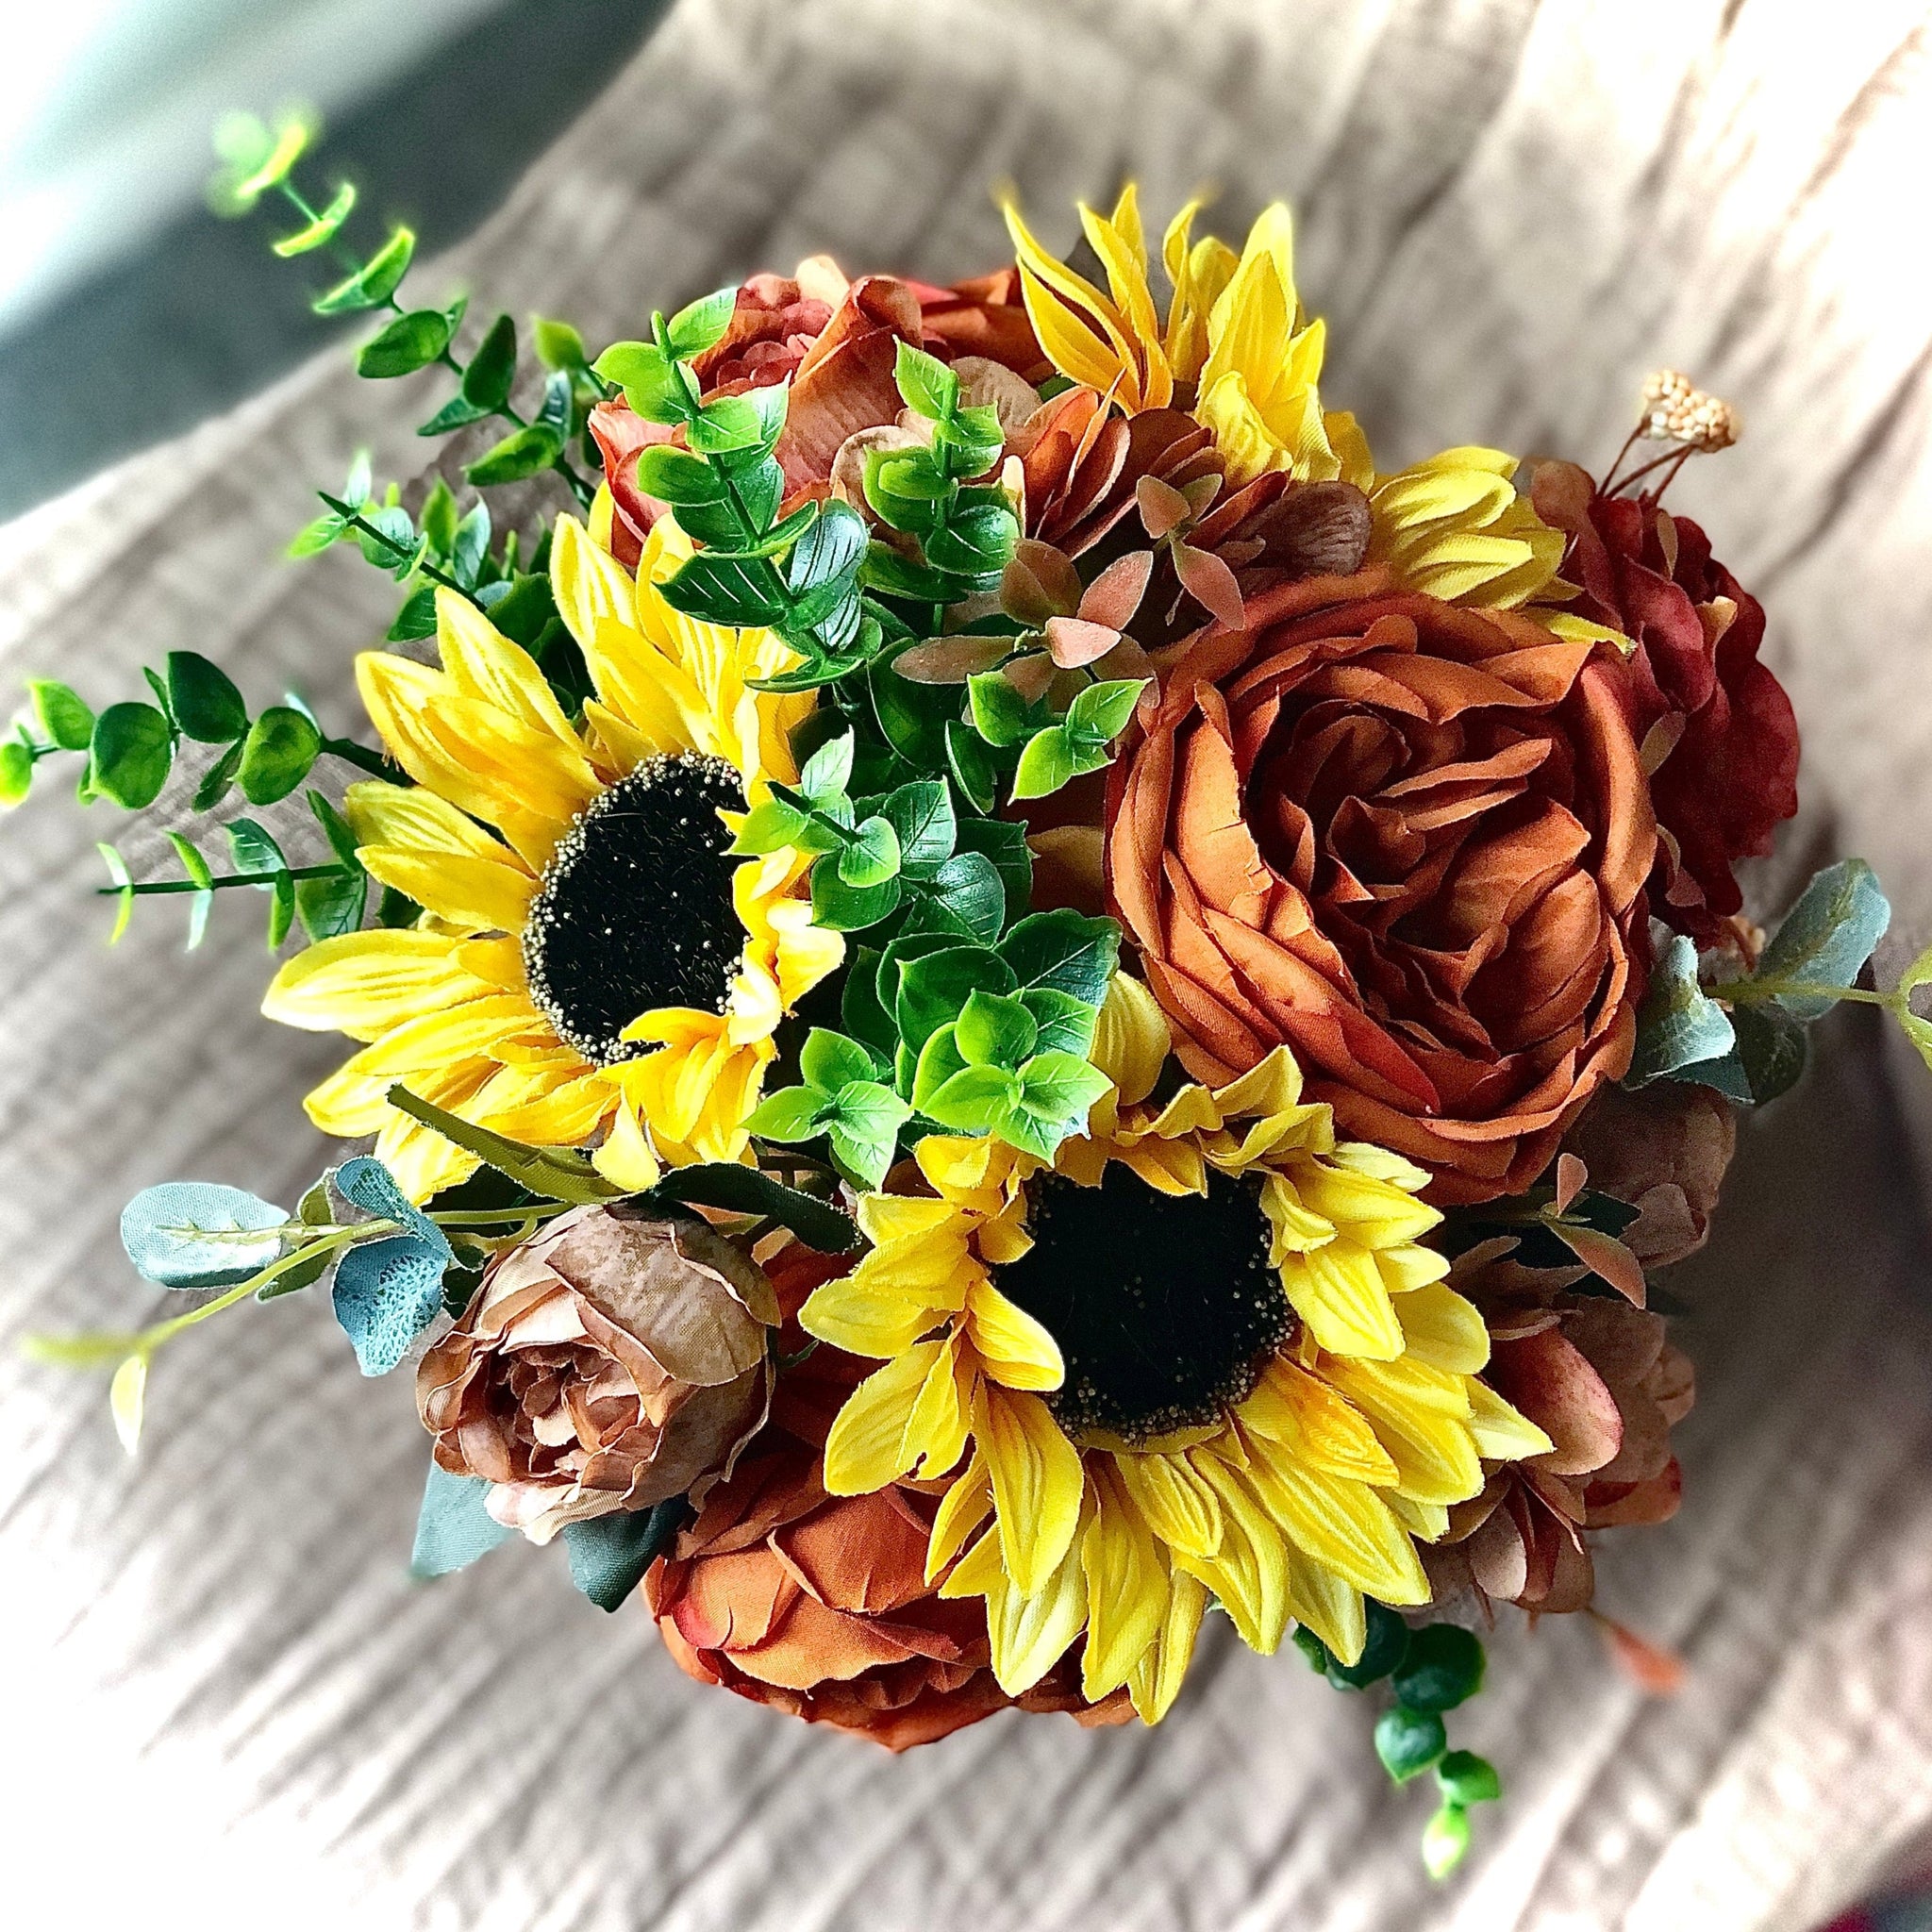 Mason jar fall tiered tray decor with sunflowers l Small sunflower cen –  The Little Rustic Farm